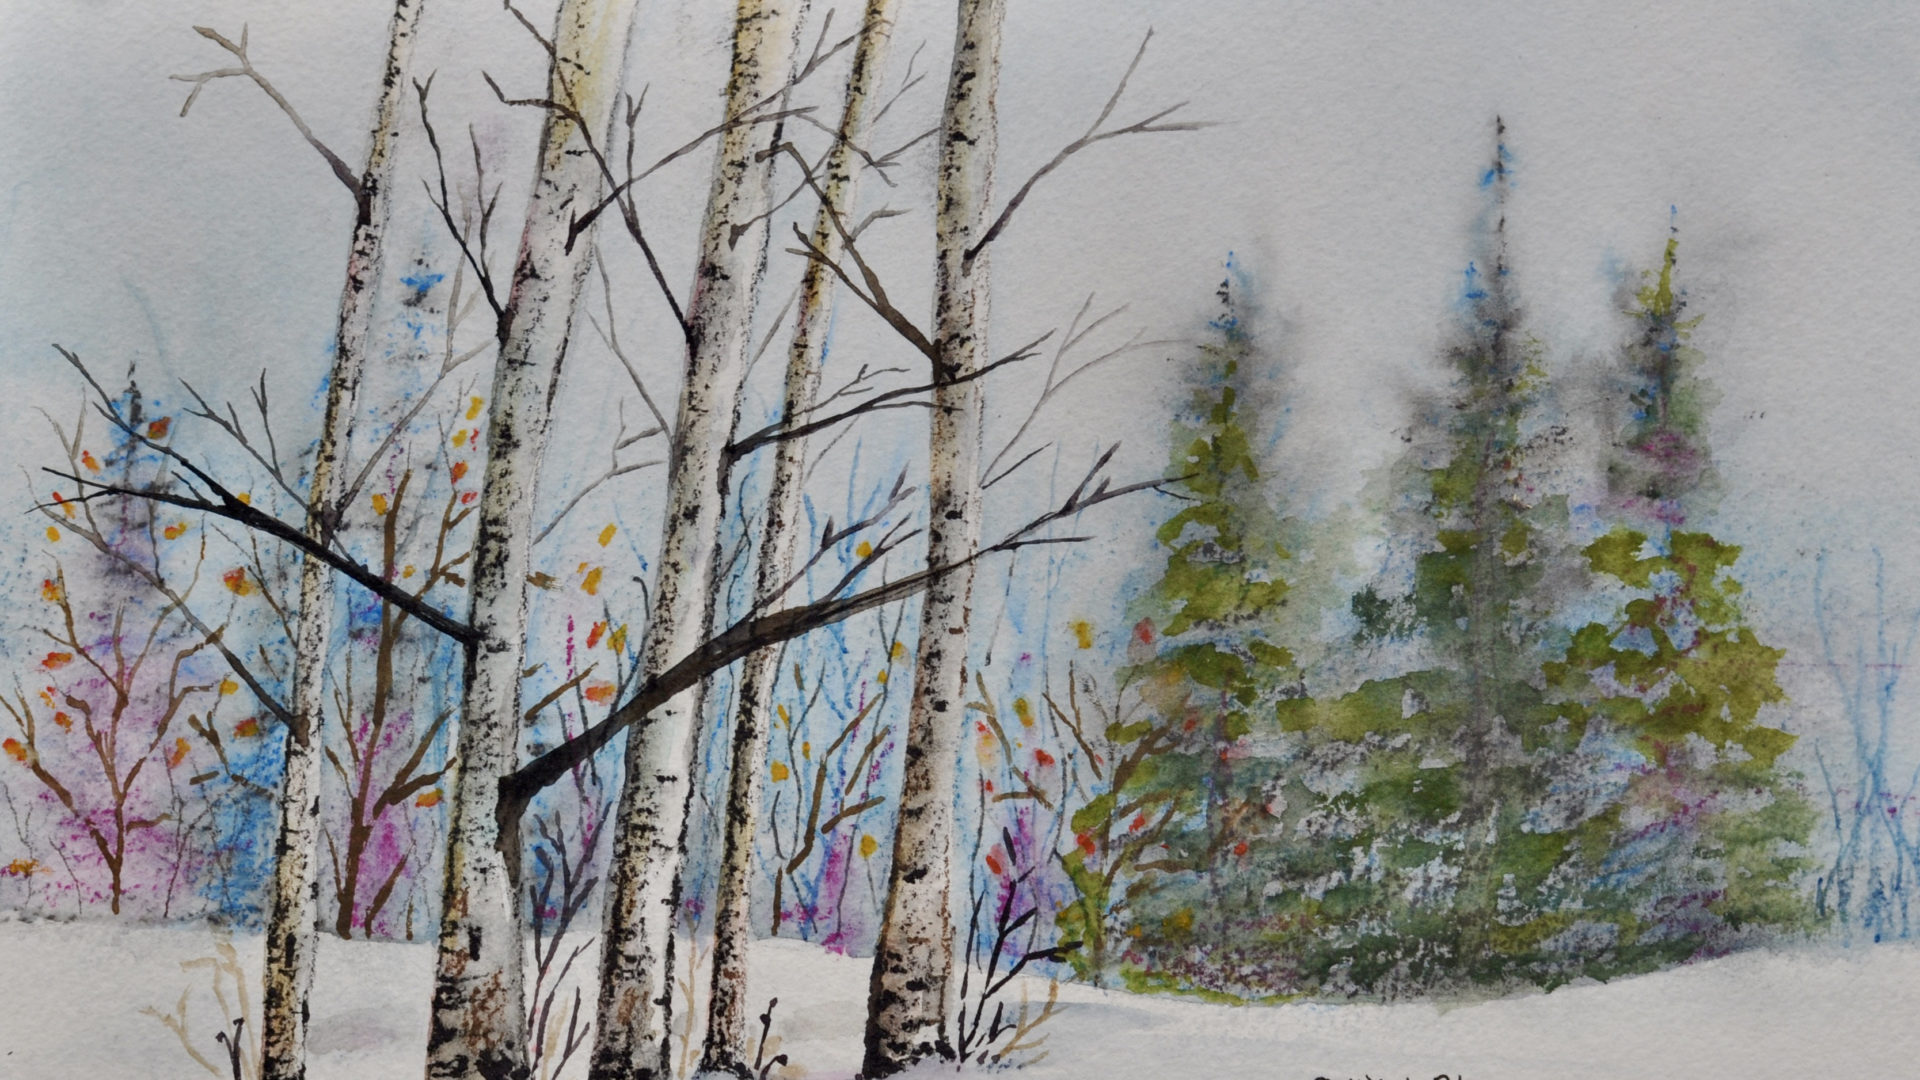 Birch and fir trees show against a field of snow in Sally Tiska Rice's winter painting. Photo courtesy of Downtown Pittsfield